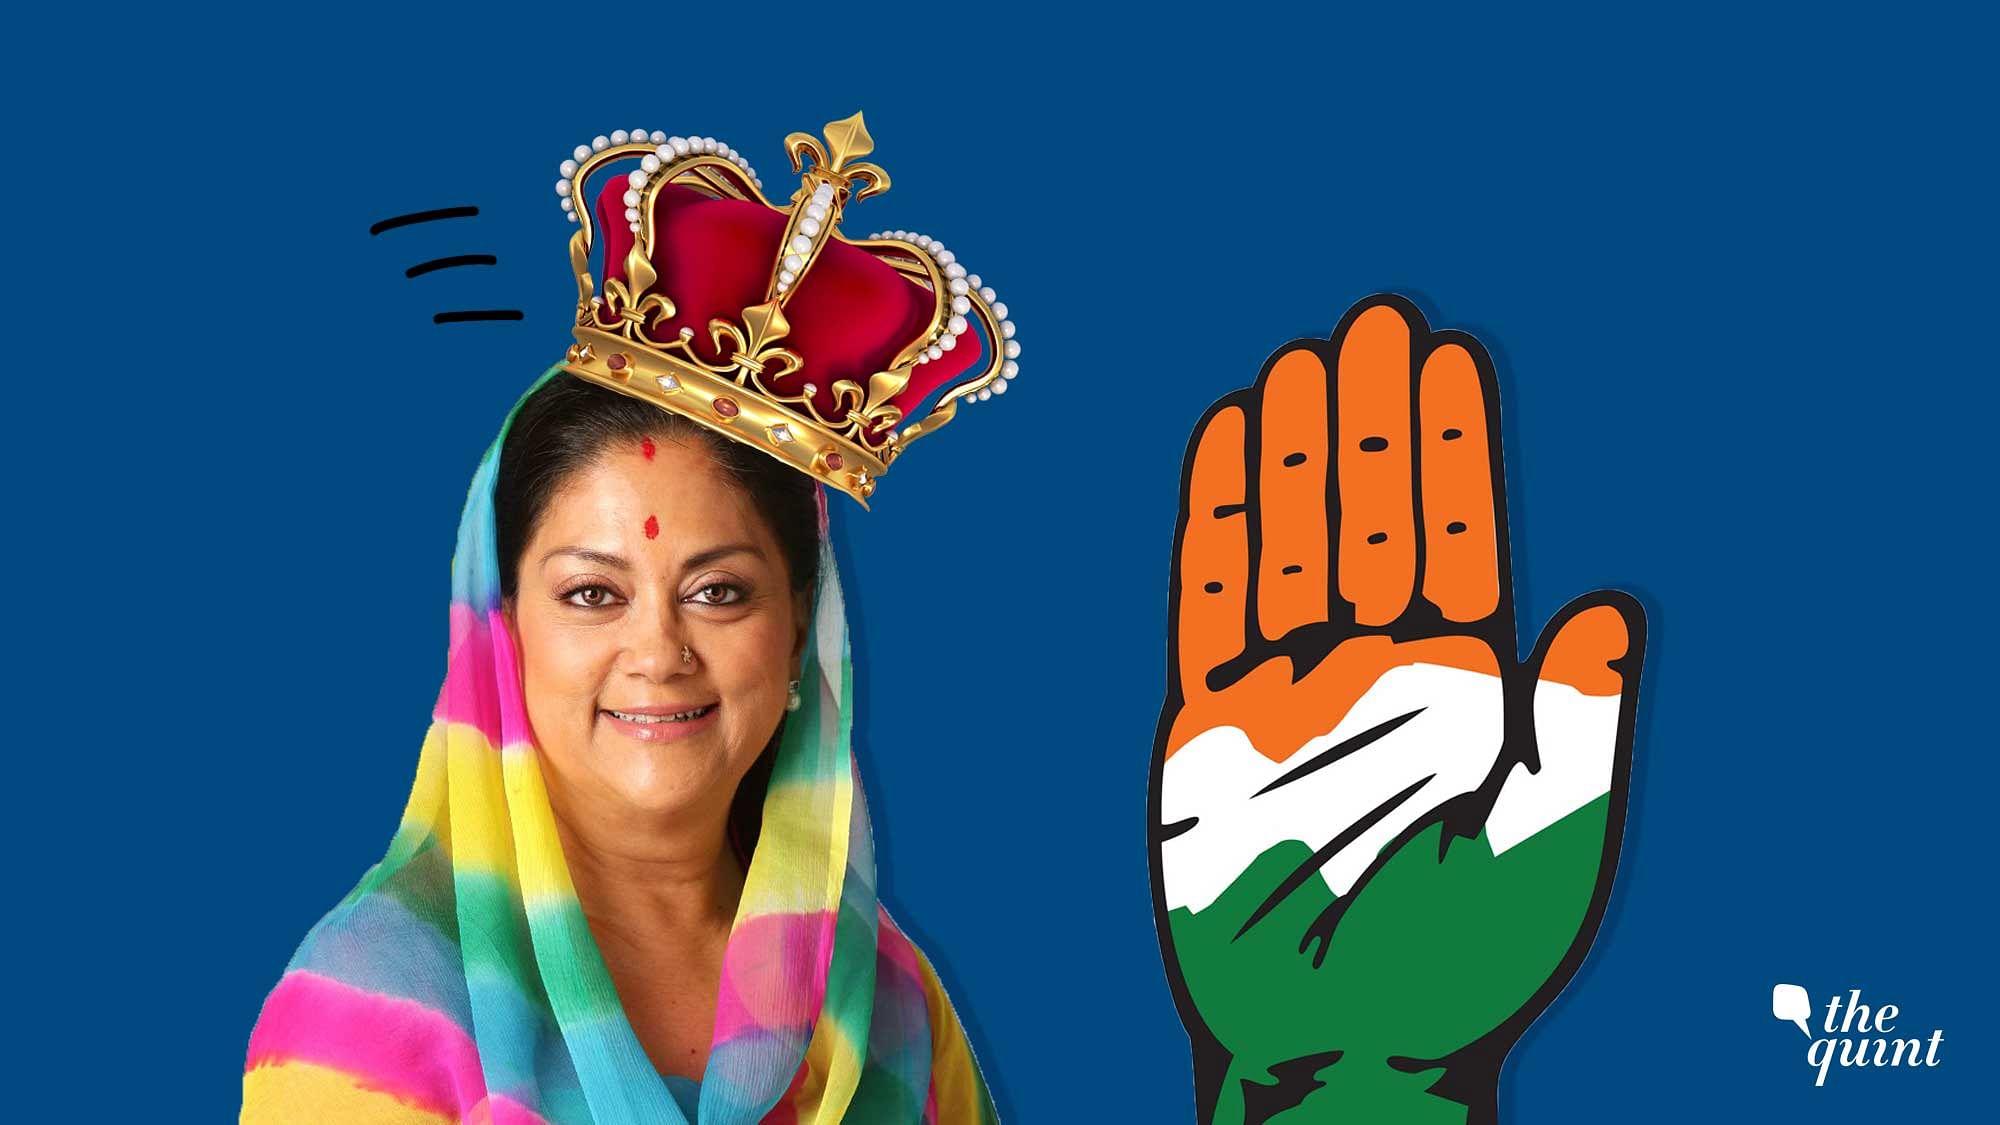 Image of Rajasthan CM Vasundhara Raje and the Congress party symbol used for representational purposes.